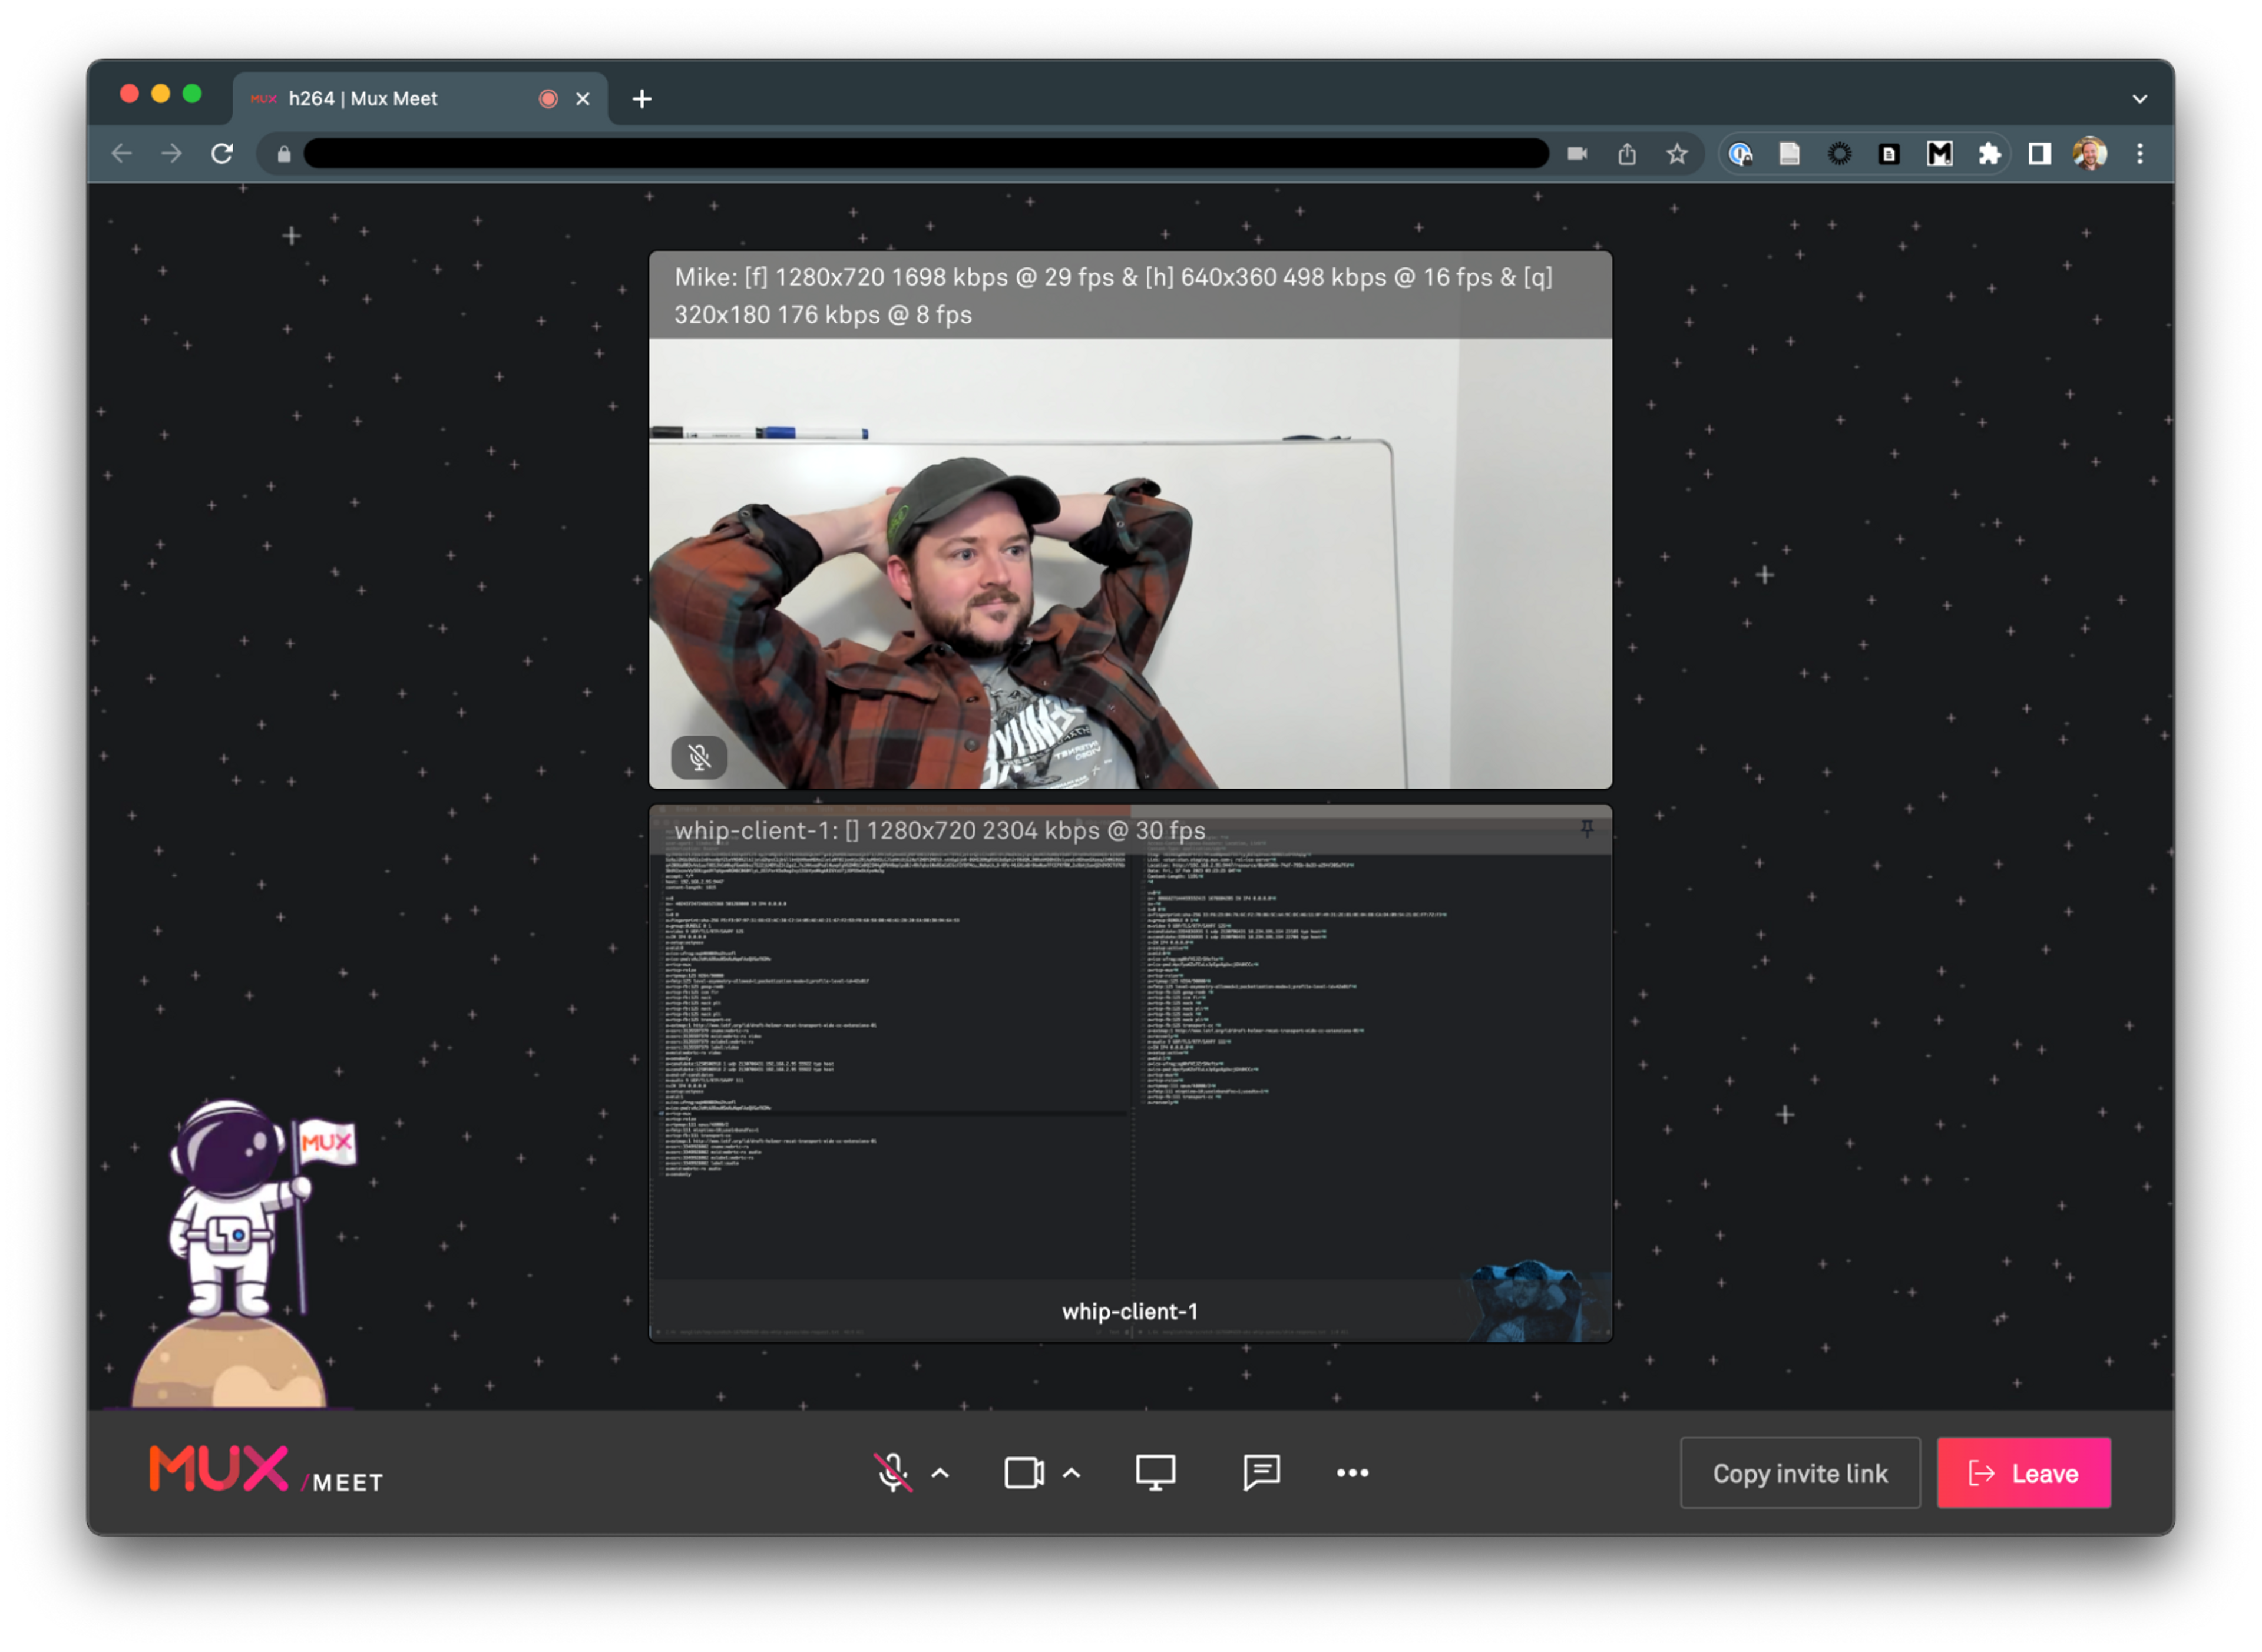 A screenshot showing a successful live stream using WHIP protocol in Mux Meet